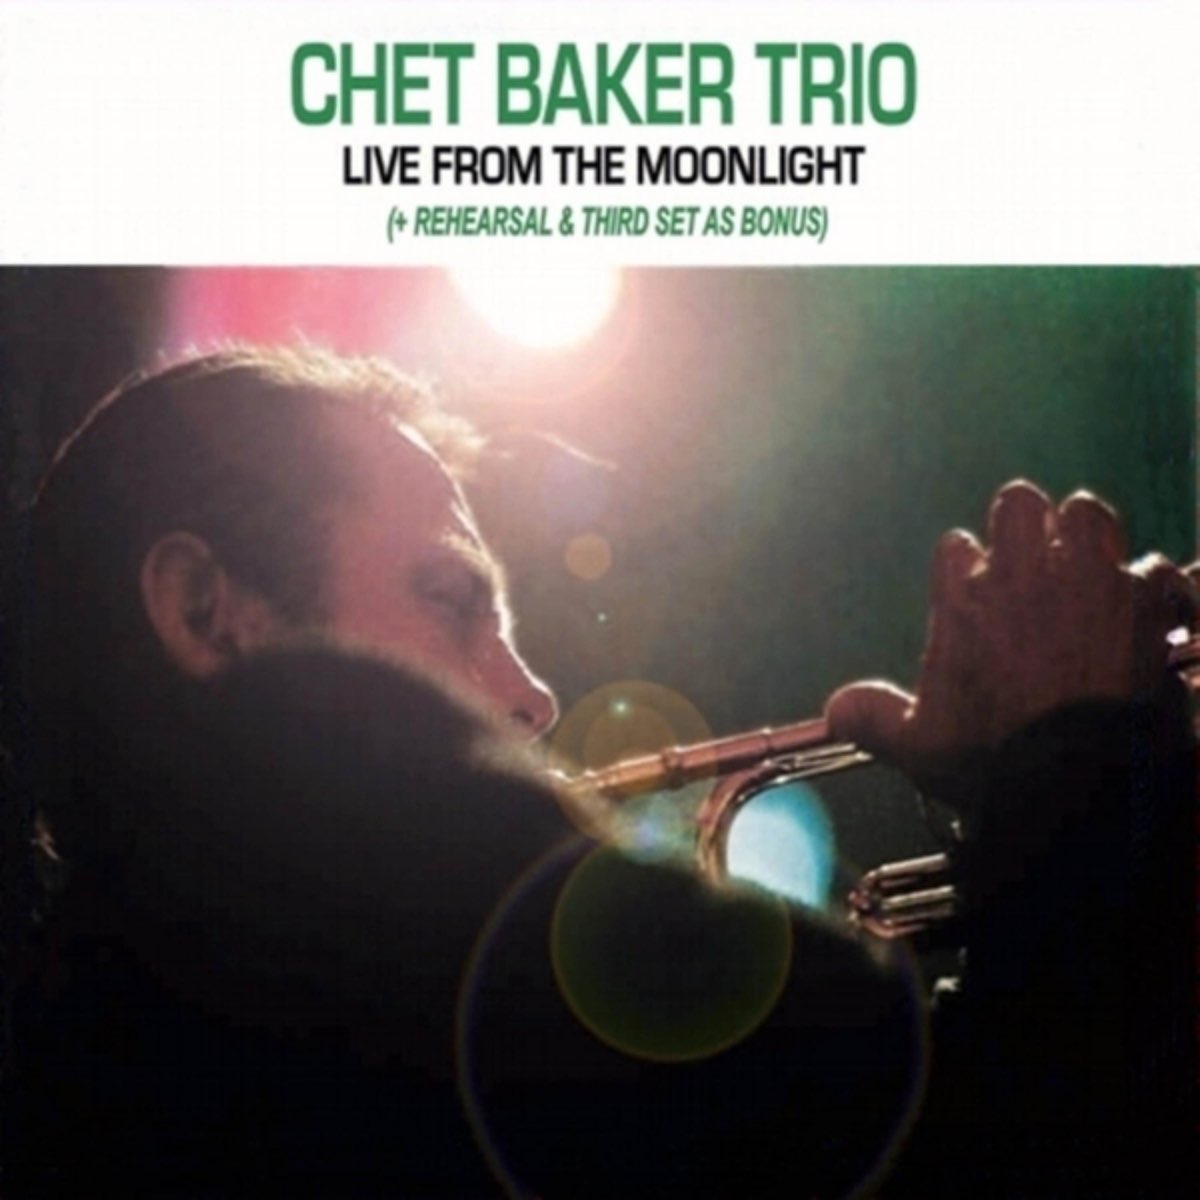 Live from the Moonlight (Live) - Album by Chet Baker Trio - Apple